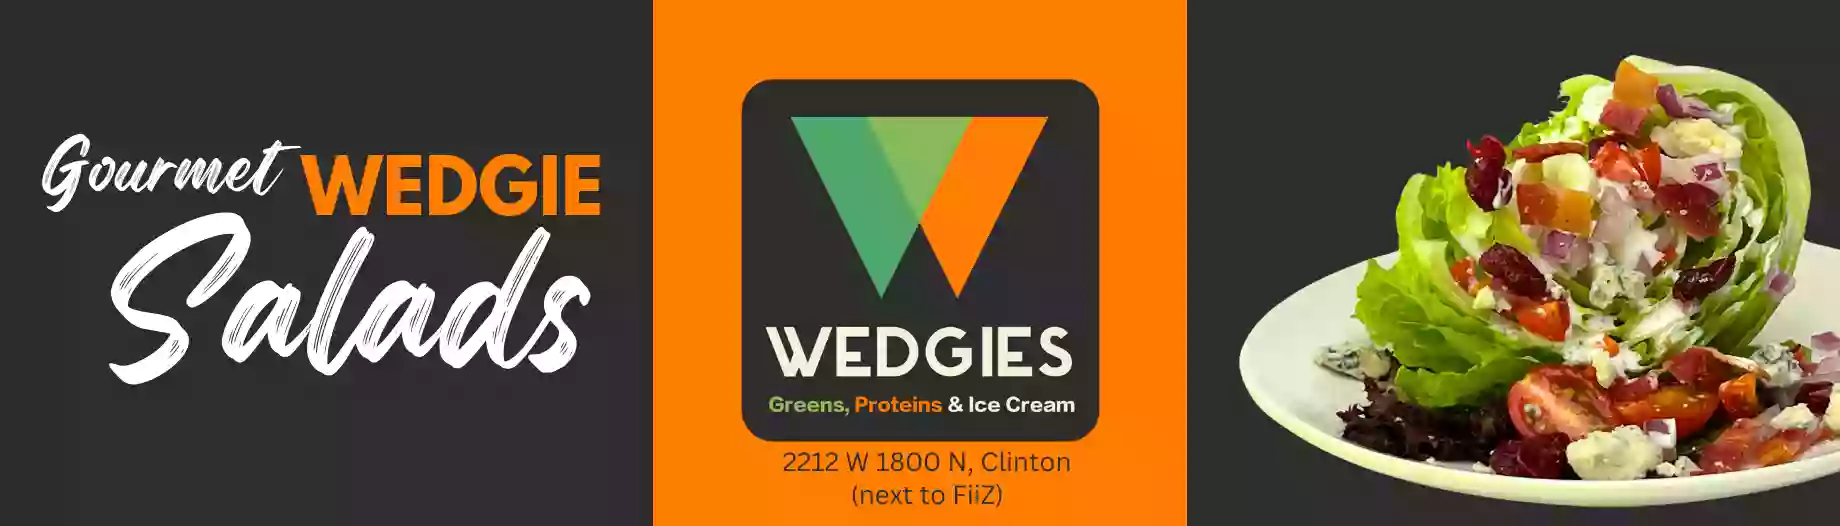 Wedgies - Greens, Proteins & Ice Cream